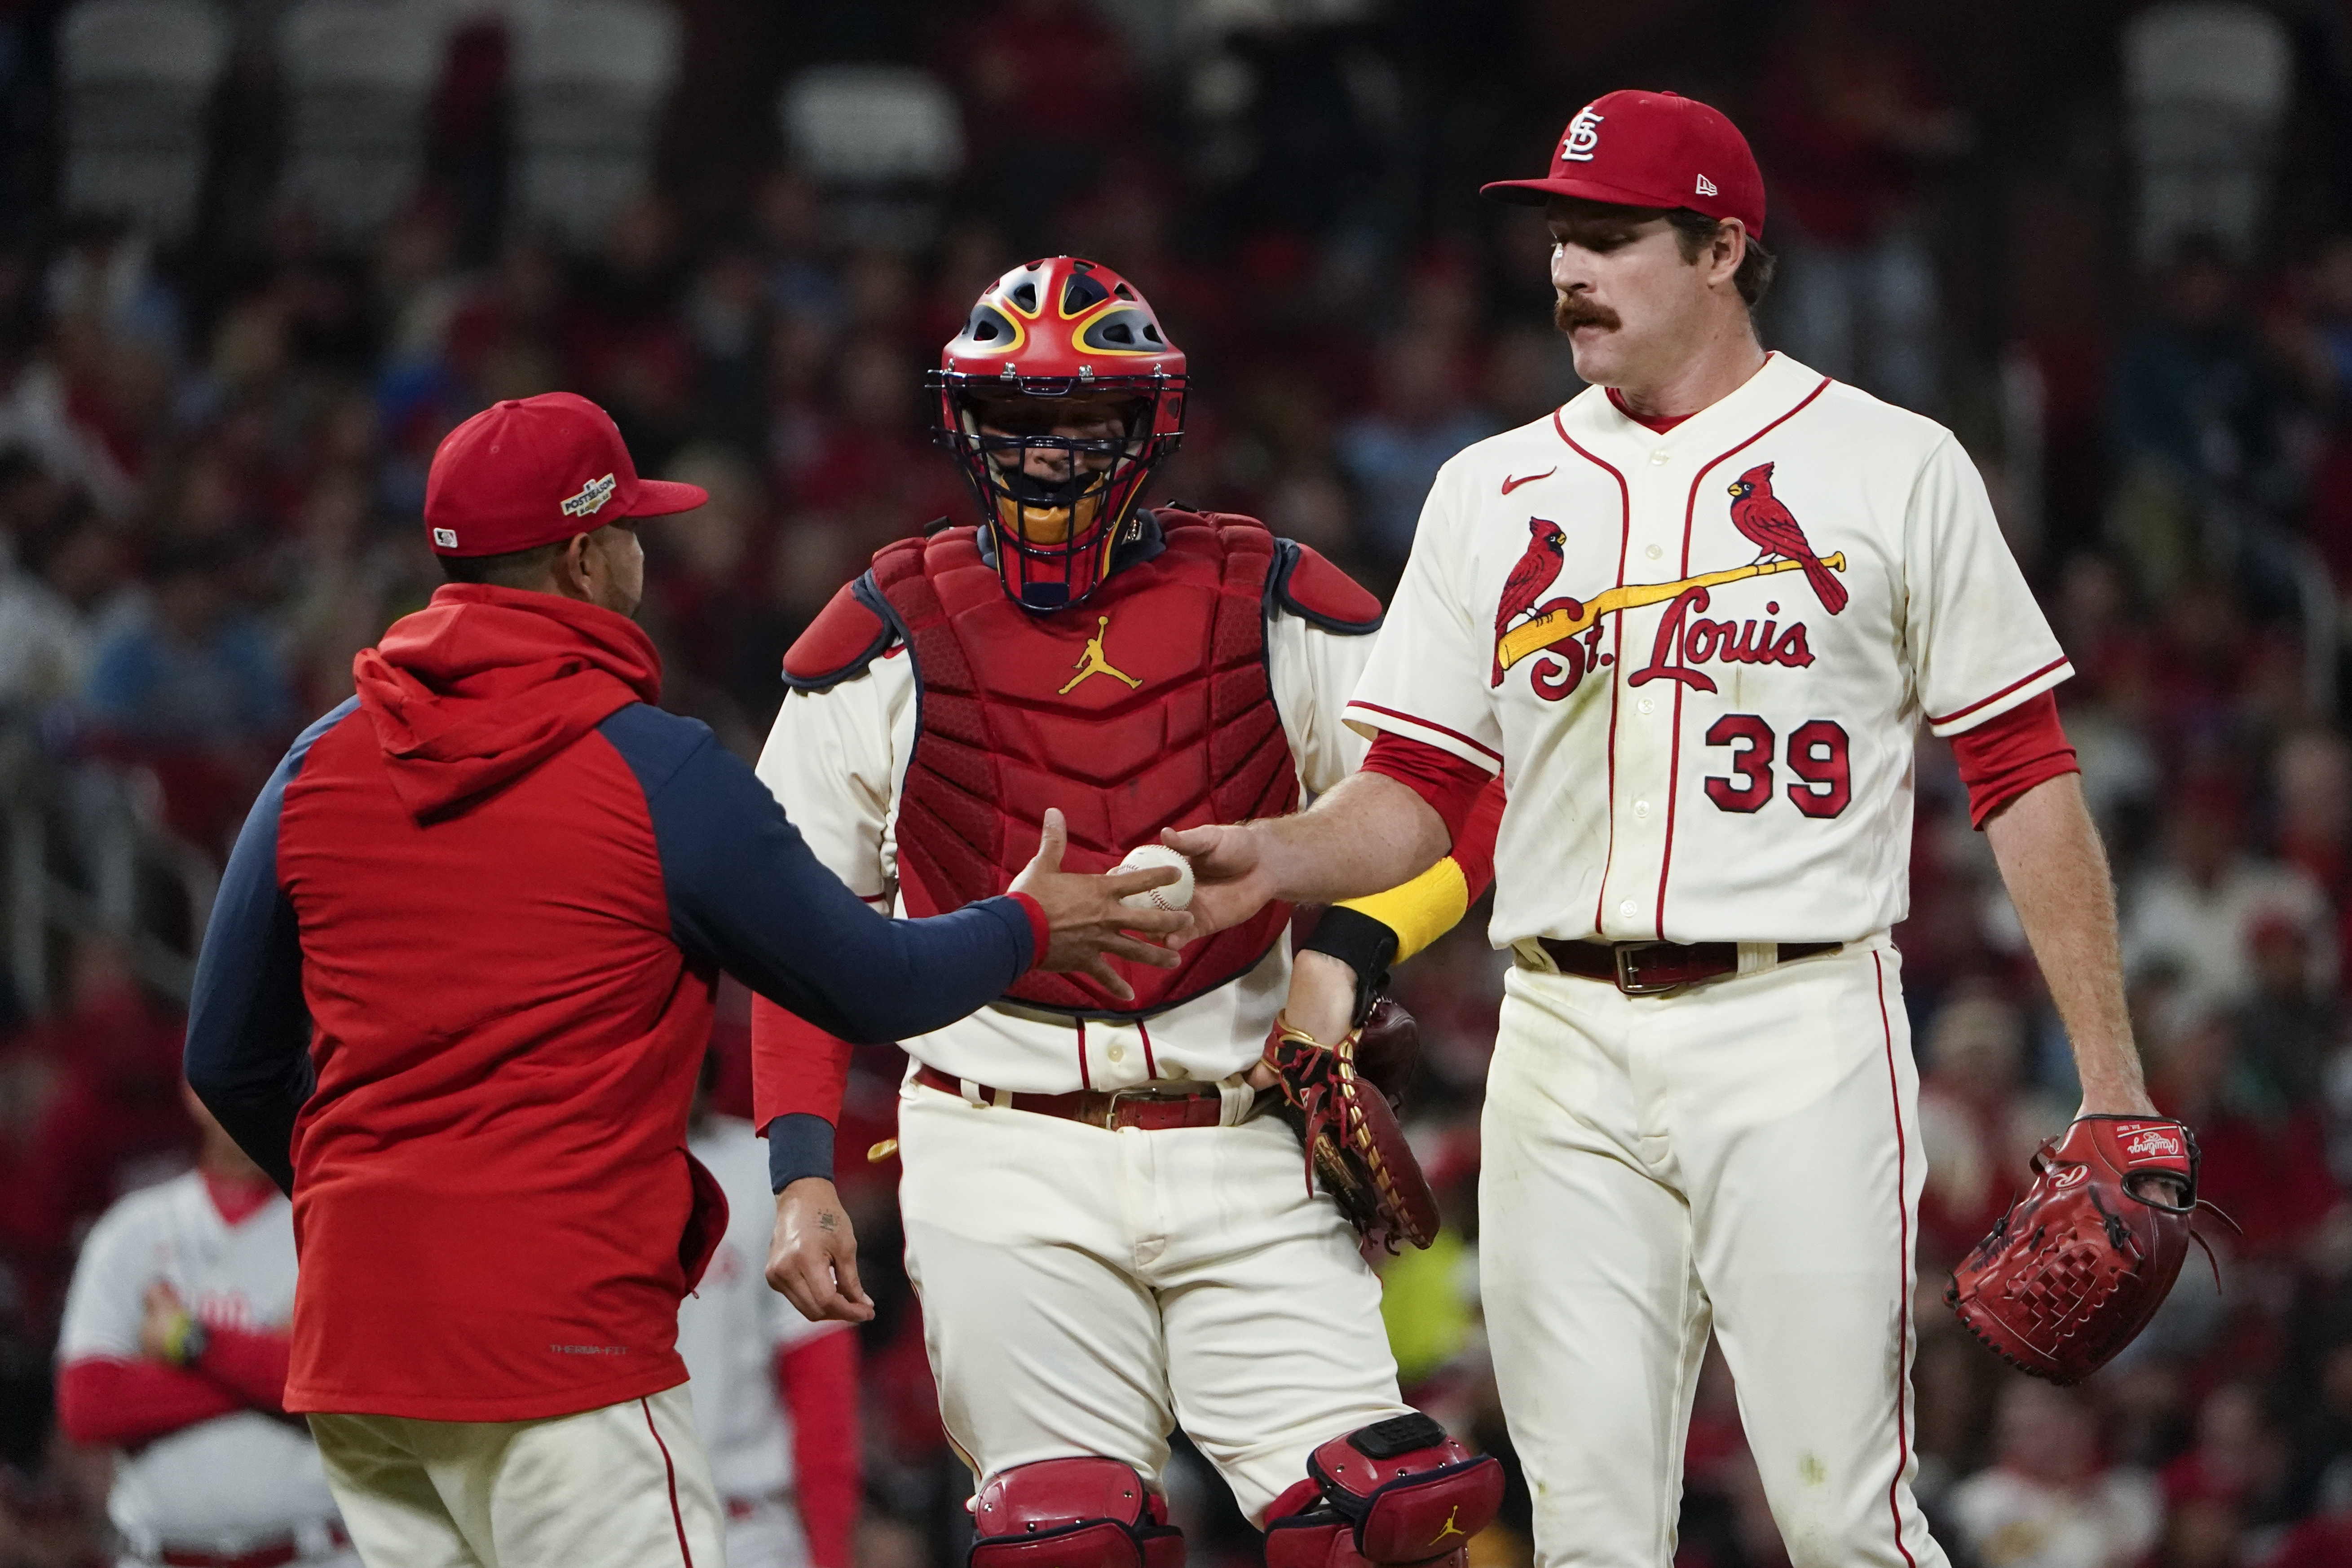 Cardinals face future without Pujols, Molina wearing red